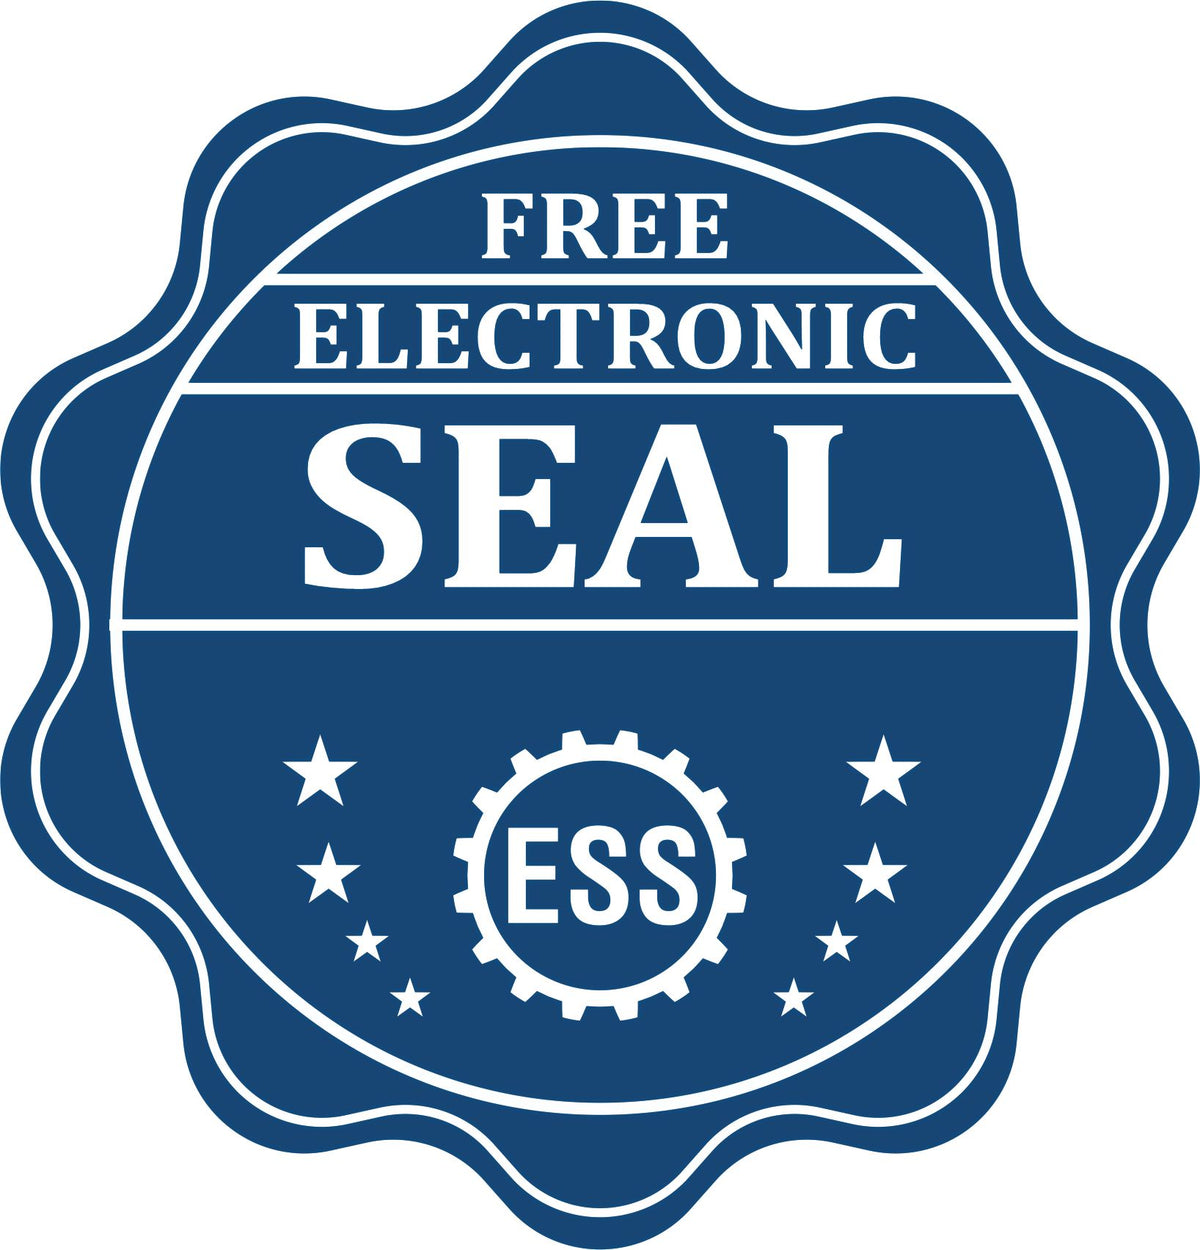 A badge showing a free electronic seal for the Idaho Geologist Desk Seal with stars and the ESS gear on the emblem.